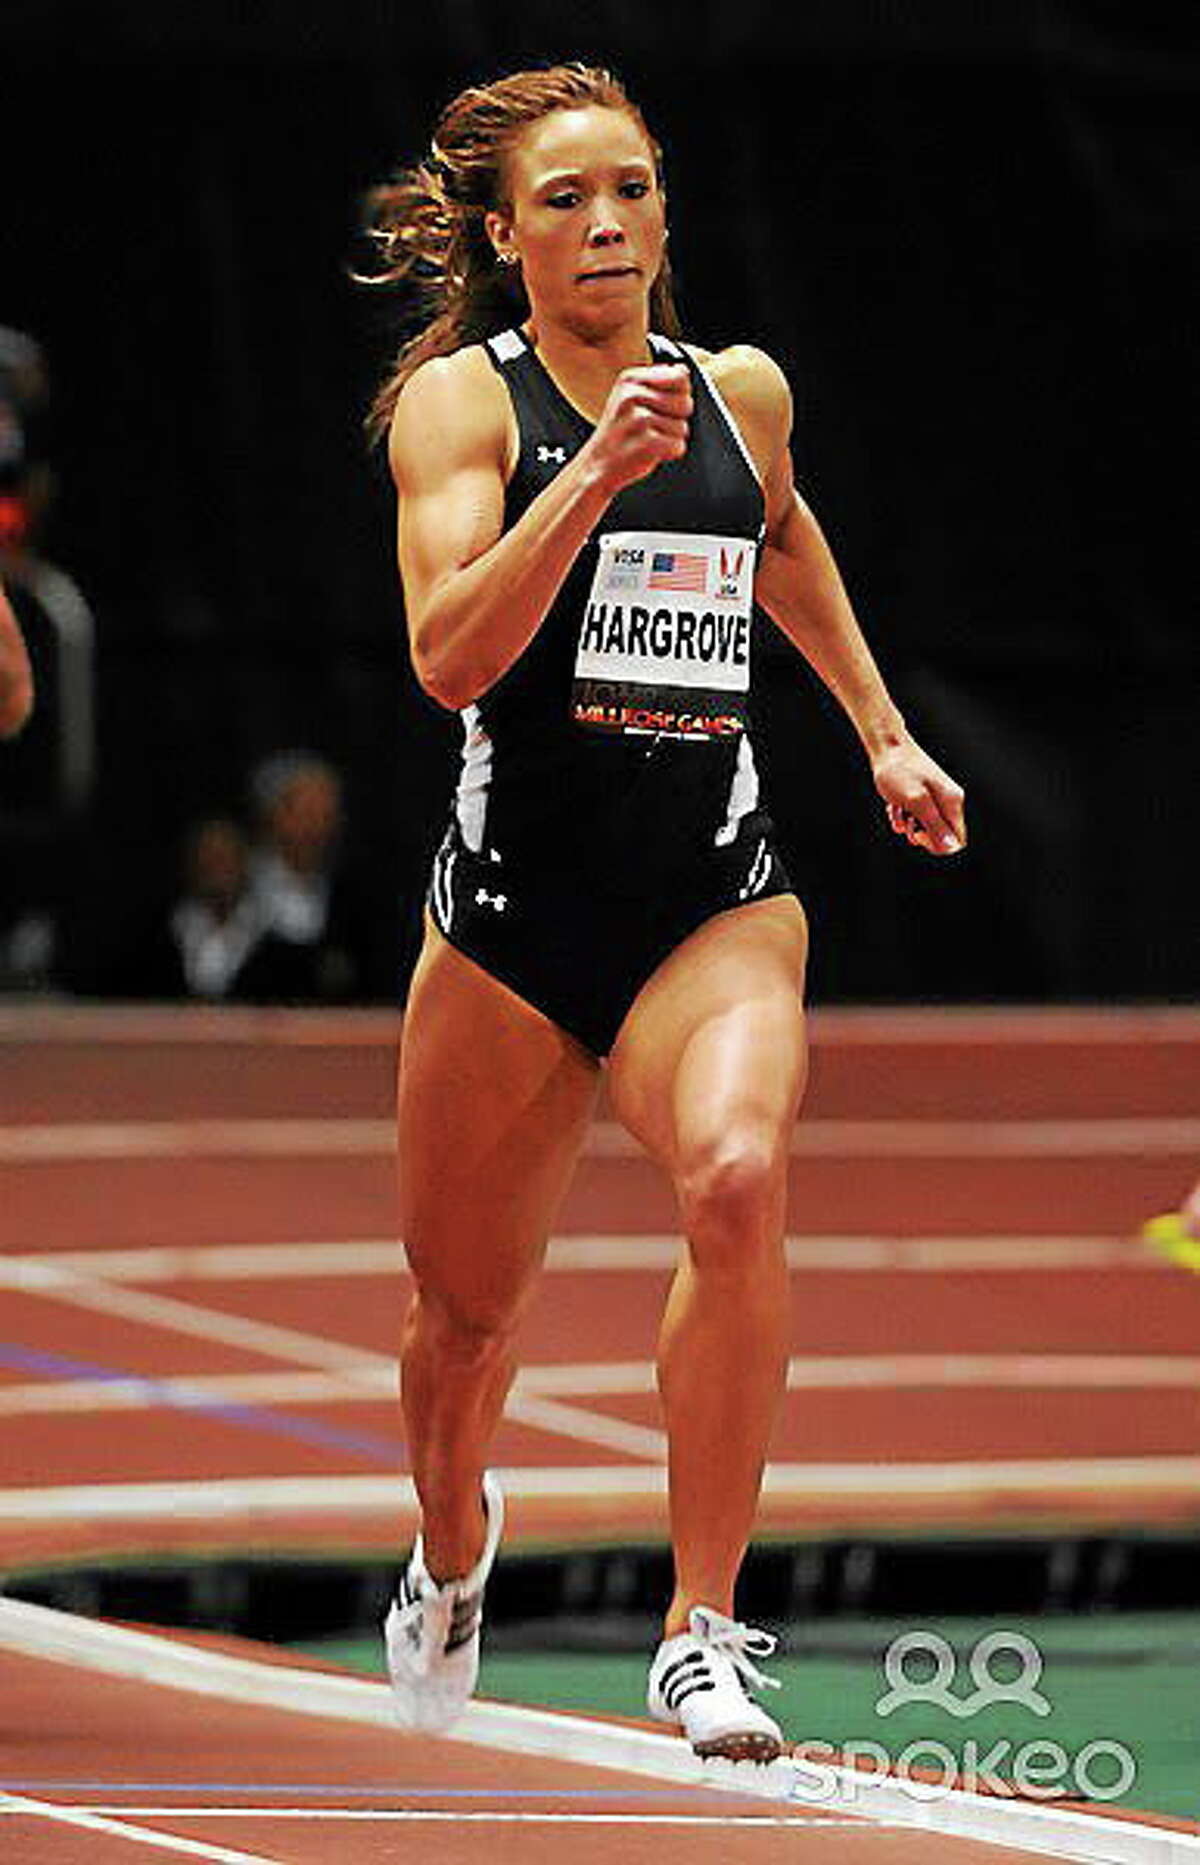 Former Hillhouse star Monica Hargrove will compete at the IAAF World Indoor Championships in Poland in March.